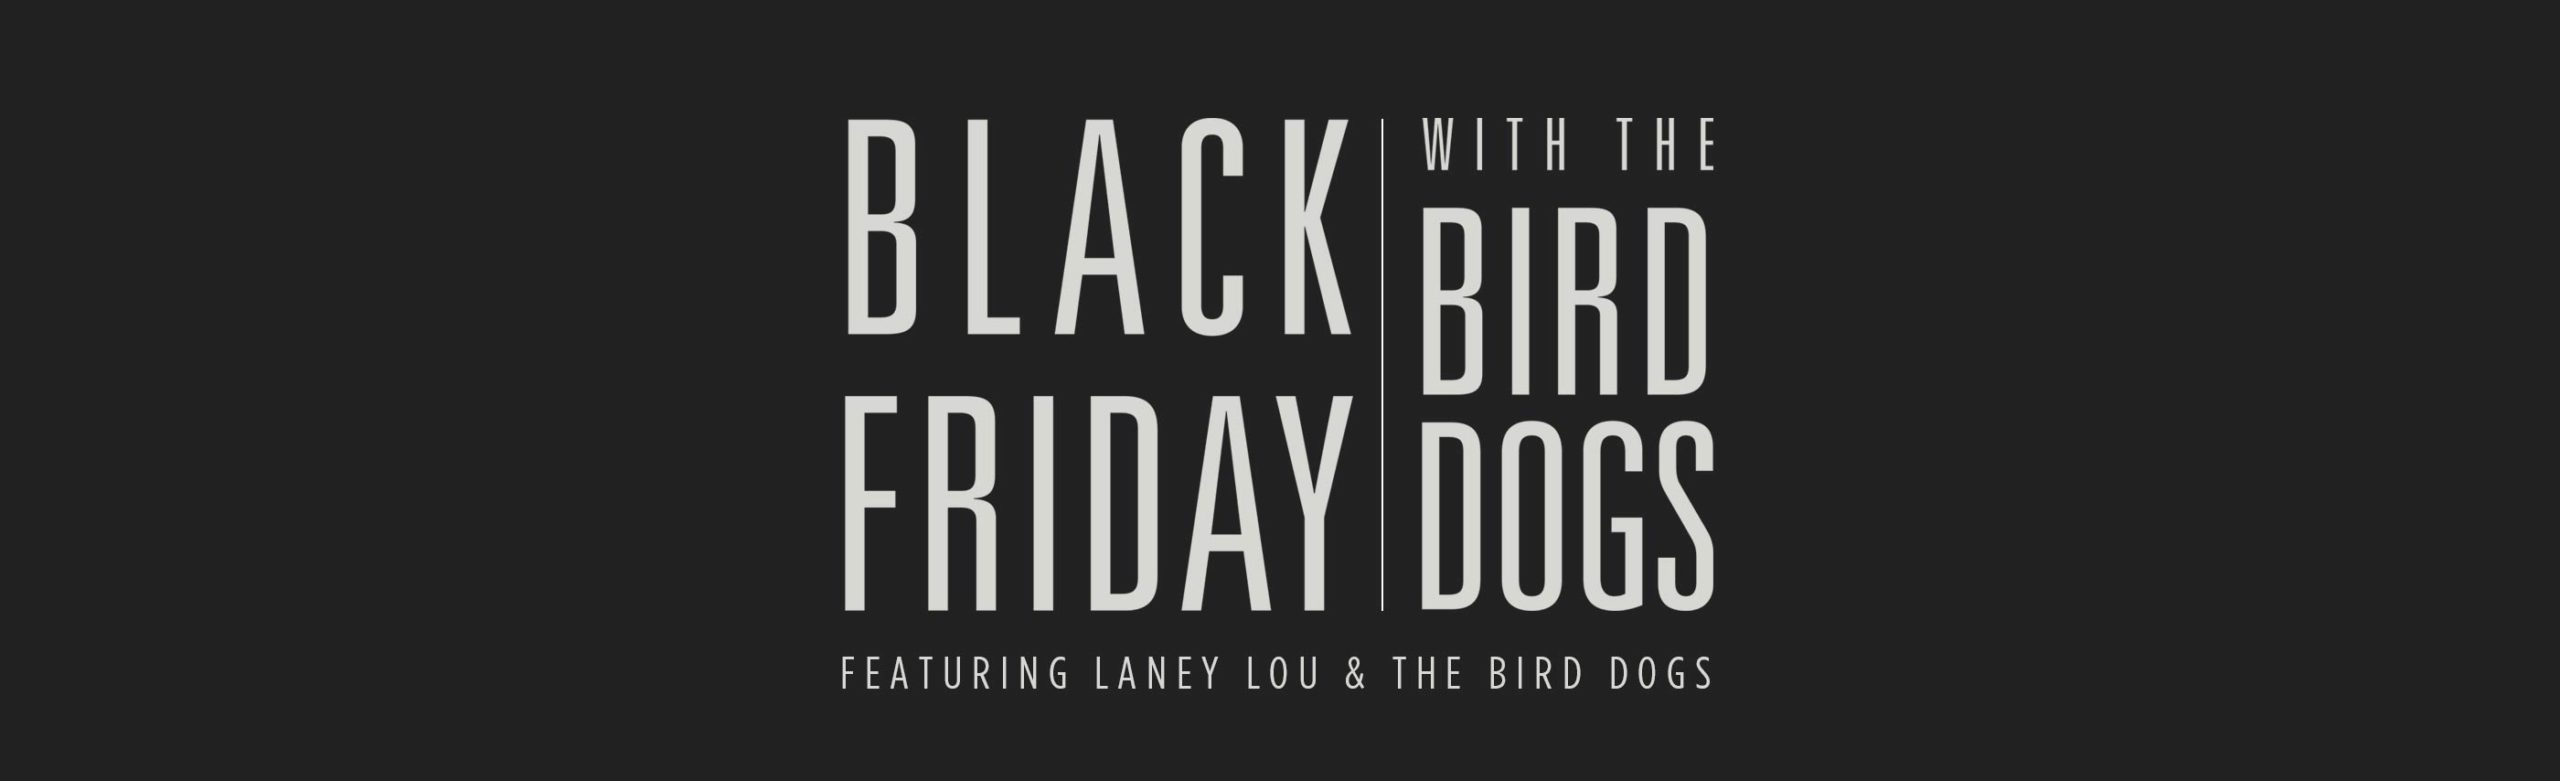 Event Info: Black Friday featuring Laney Lou & The Bird Dogs at The ELM 2021 Image